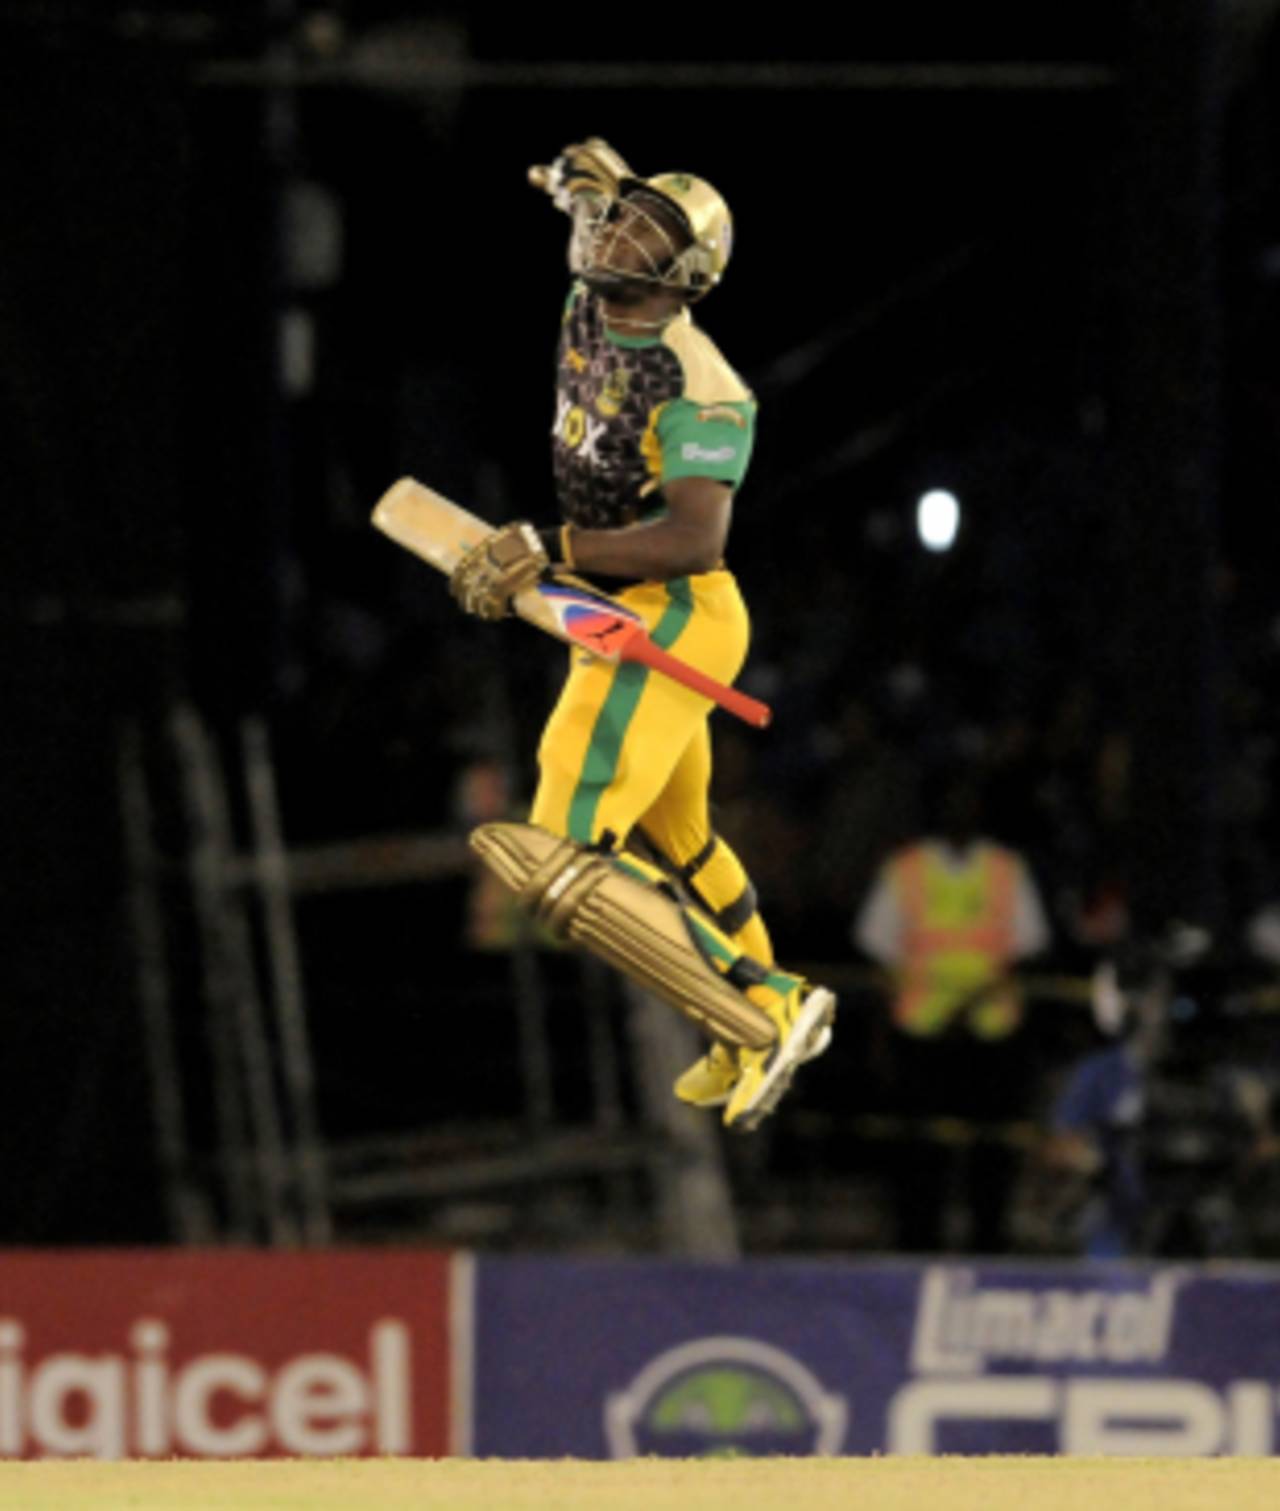 Andre Russell smoked 29 not out off 6 to win the game,  Jamaica Tallawahs v Barbados Tridents, Caribbean Premier League 2013, 2nd semi-final, Port-of-Spain, August 23, 2013